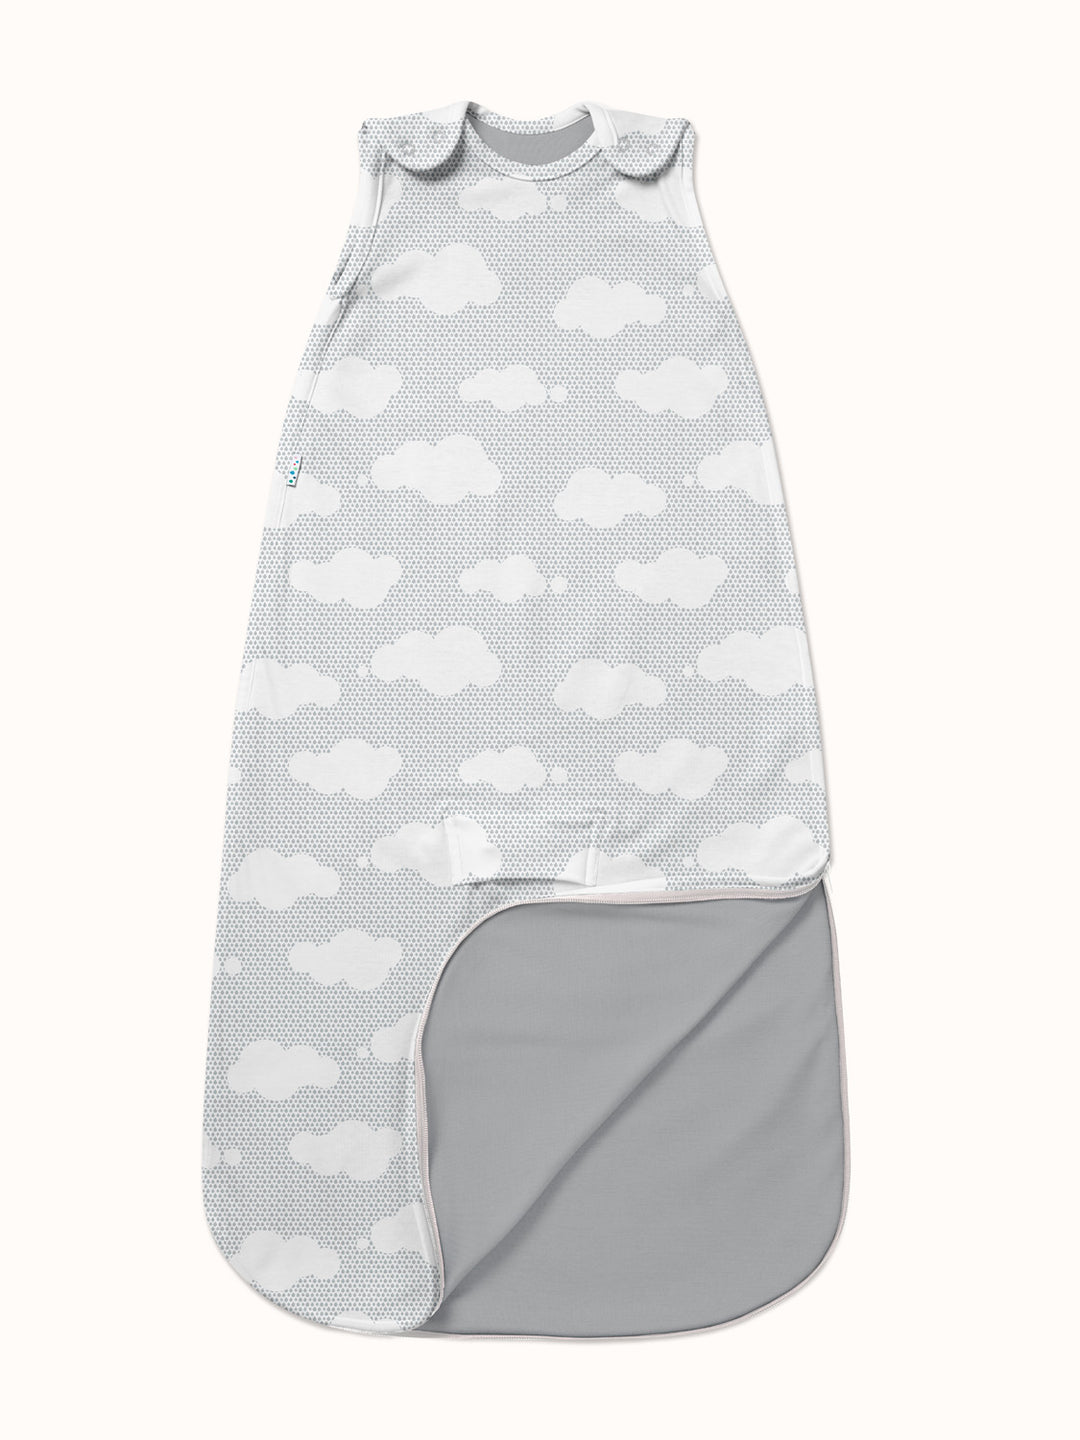 Imperfect Merino Baby Sleeping Bag Imperfect Superlove Outlet Silver Linings